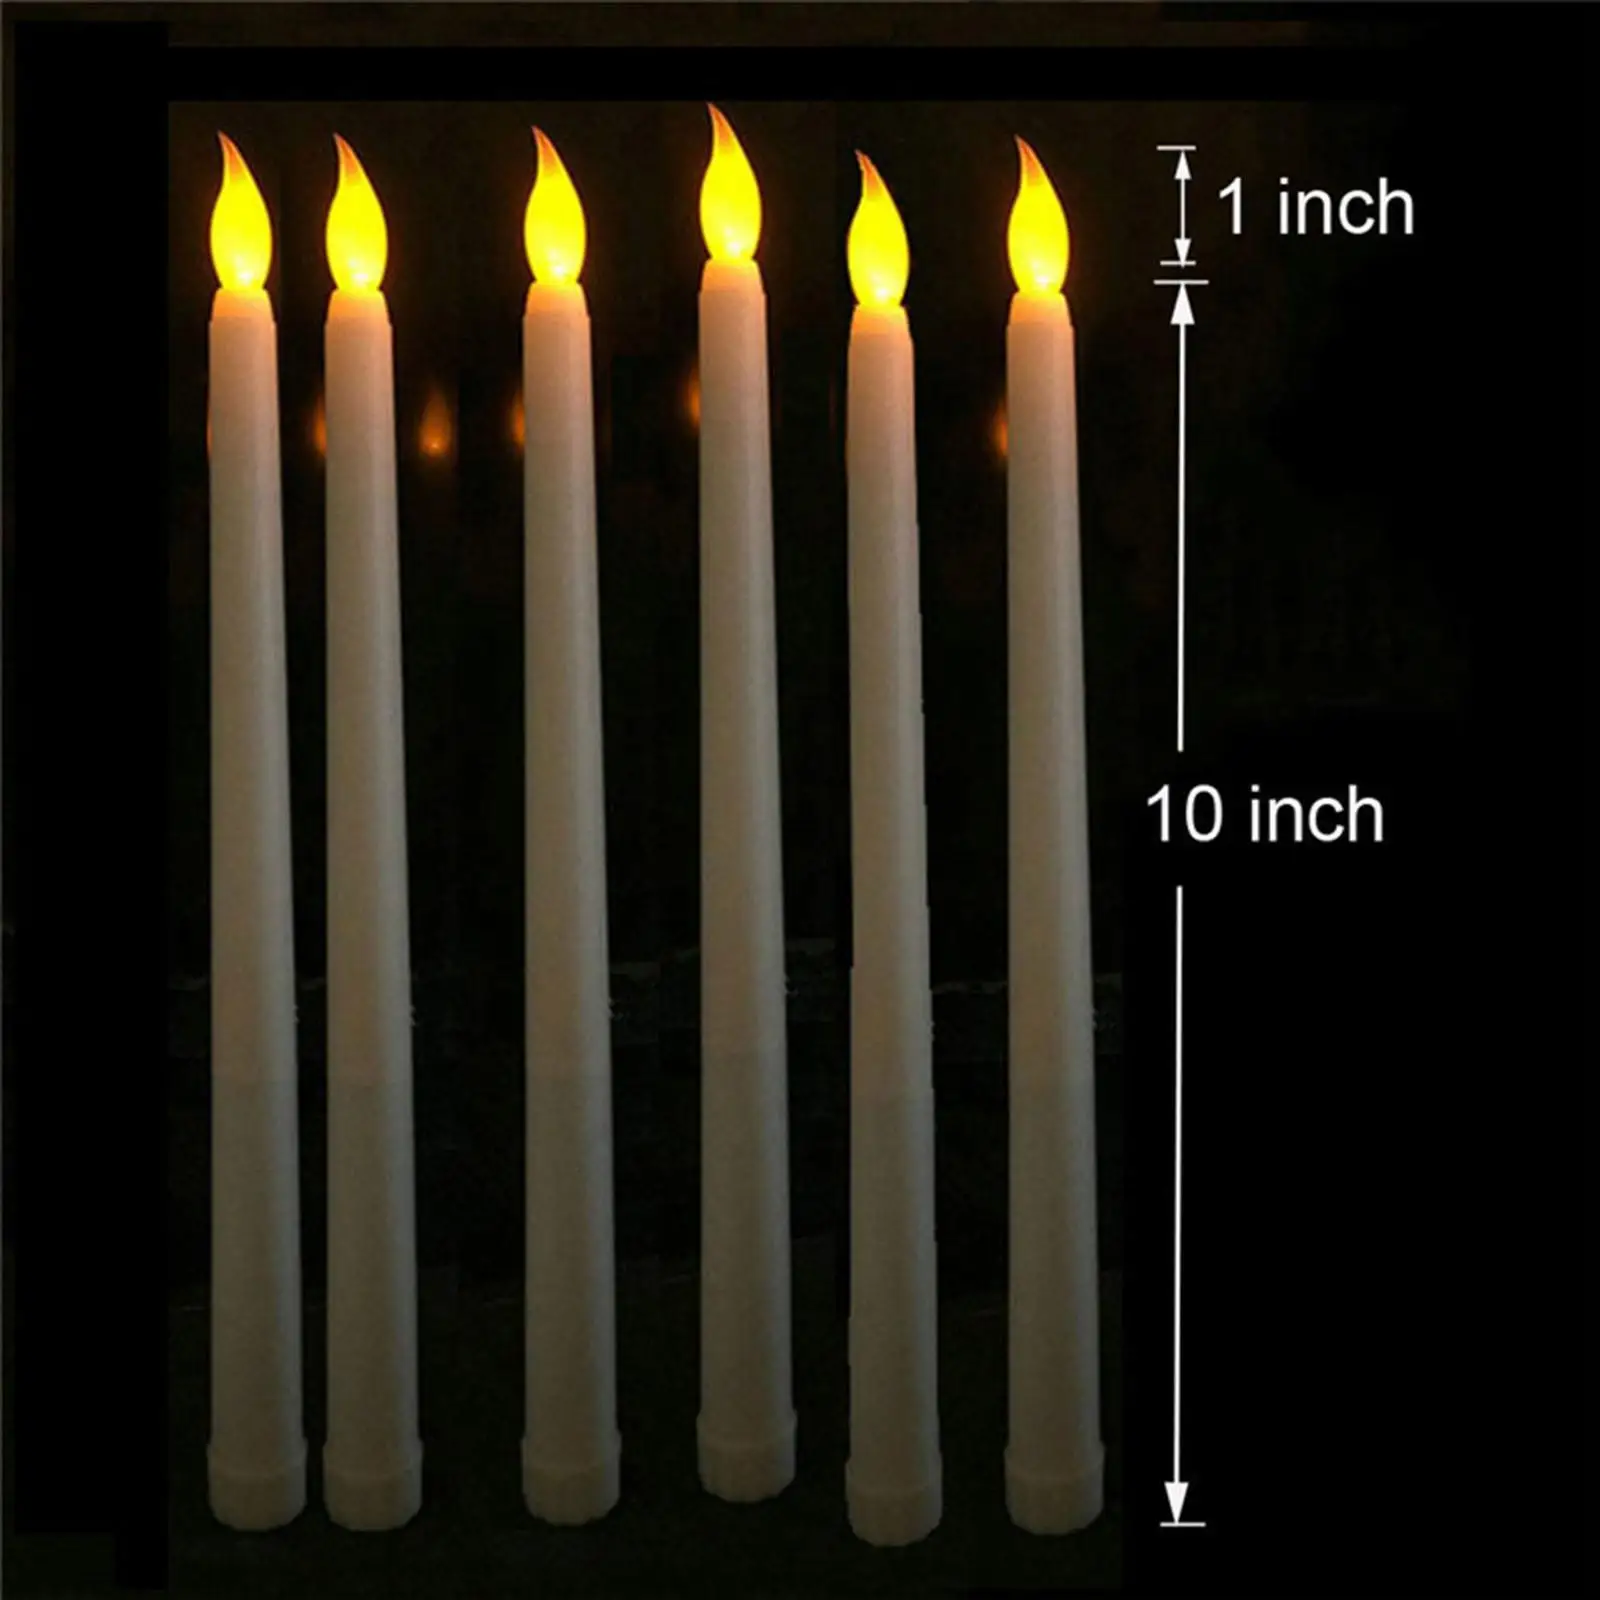 6 Pieces Flameless LED Candles Battery Operated Tea Lights Electric Candles for Party Office Wedding Bedroom Decoration